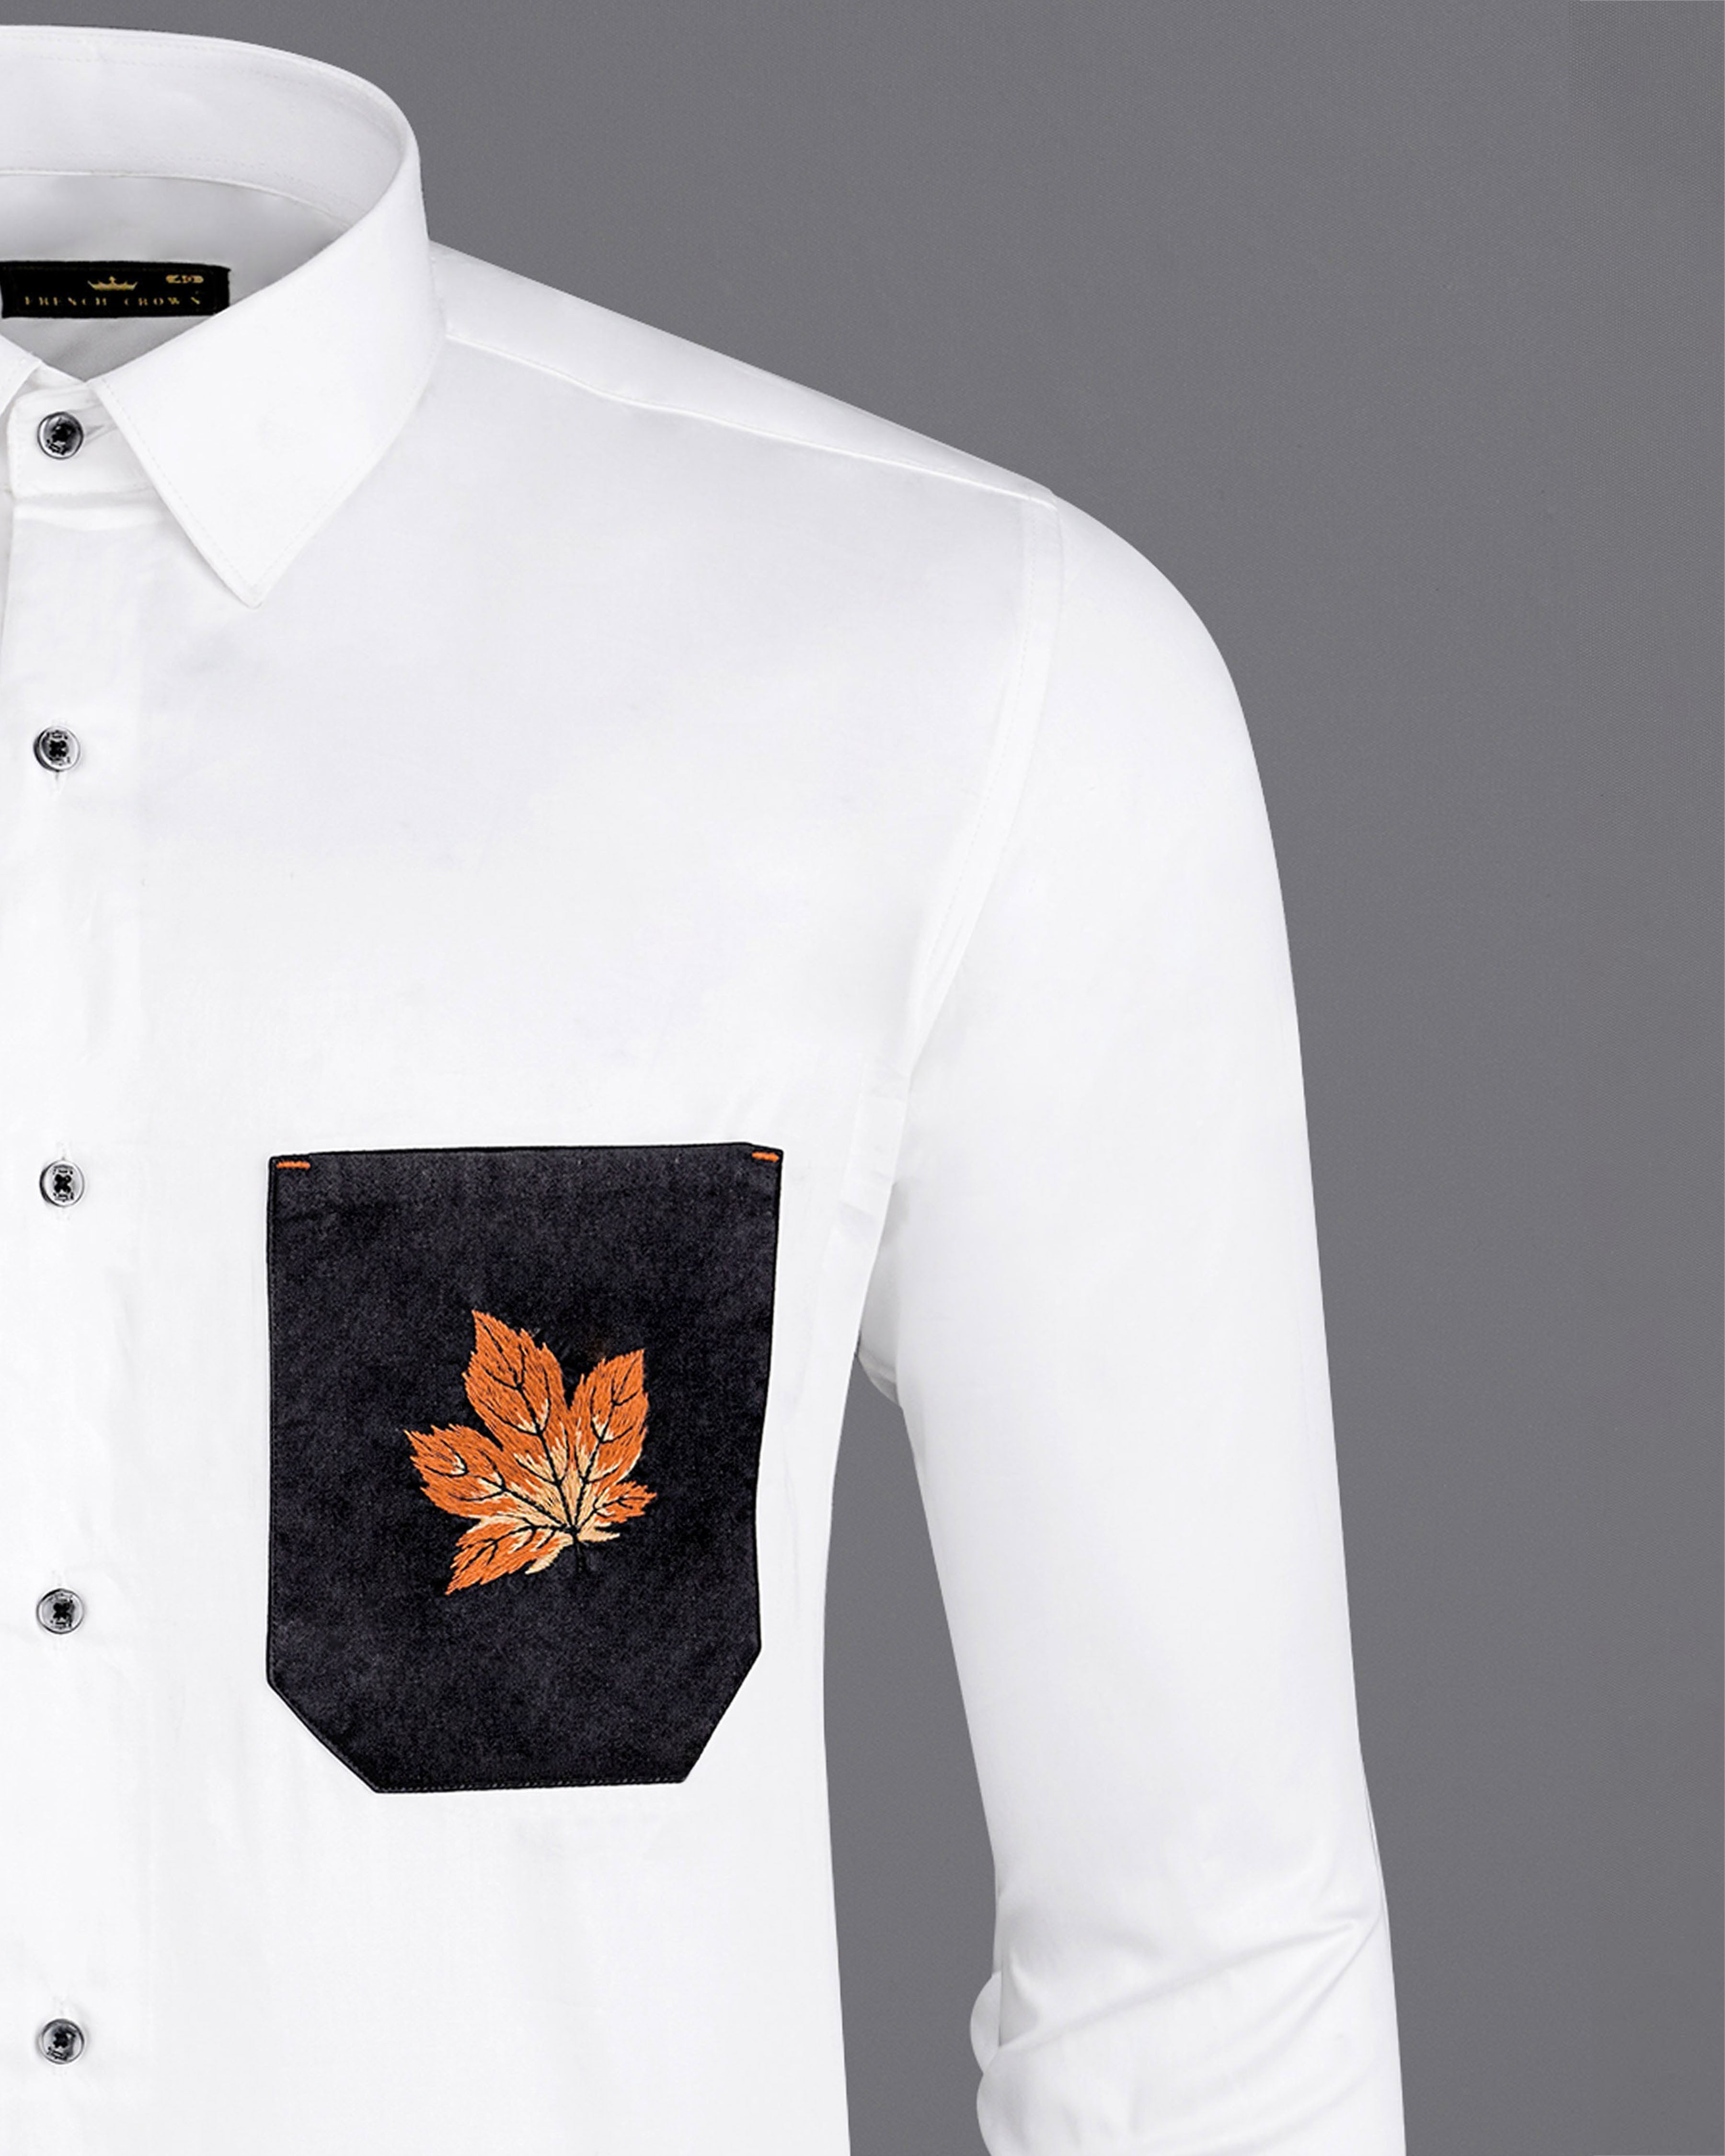 Bright White with Black Pocket and Leaves Embroidered Super Soft Premium Cotton Shirt 1062-BLK-P494-38, 1062-BLK-P494-H-38, 1062-BLK-P494-39, 1062-BLK-P494-H-39, 1062-BLK-P494-40, 1062-BLK-P494-H-40, 1062-BLK-P494-42, 1062-BLK-P494-H-42, 1062-BLK-P494-44, 1062-BLK-P494-H-44, 1062-BLK-P494-46, 1062-BLK-P494-H-46, 1062-BLK-P494-48, 1062-BLK-P494-H-48, 1062-BLK-P494-50, 1062-BLK-P494-H-50, 1062-BLK-P494-52, 1062-BLK-P494-H-52